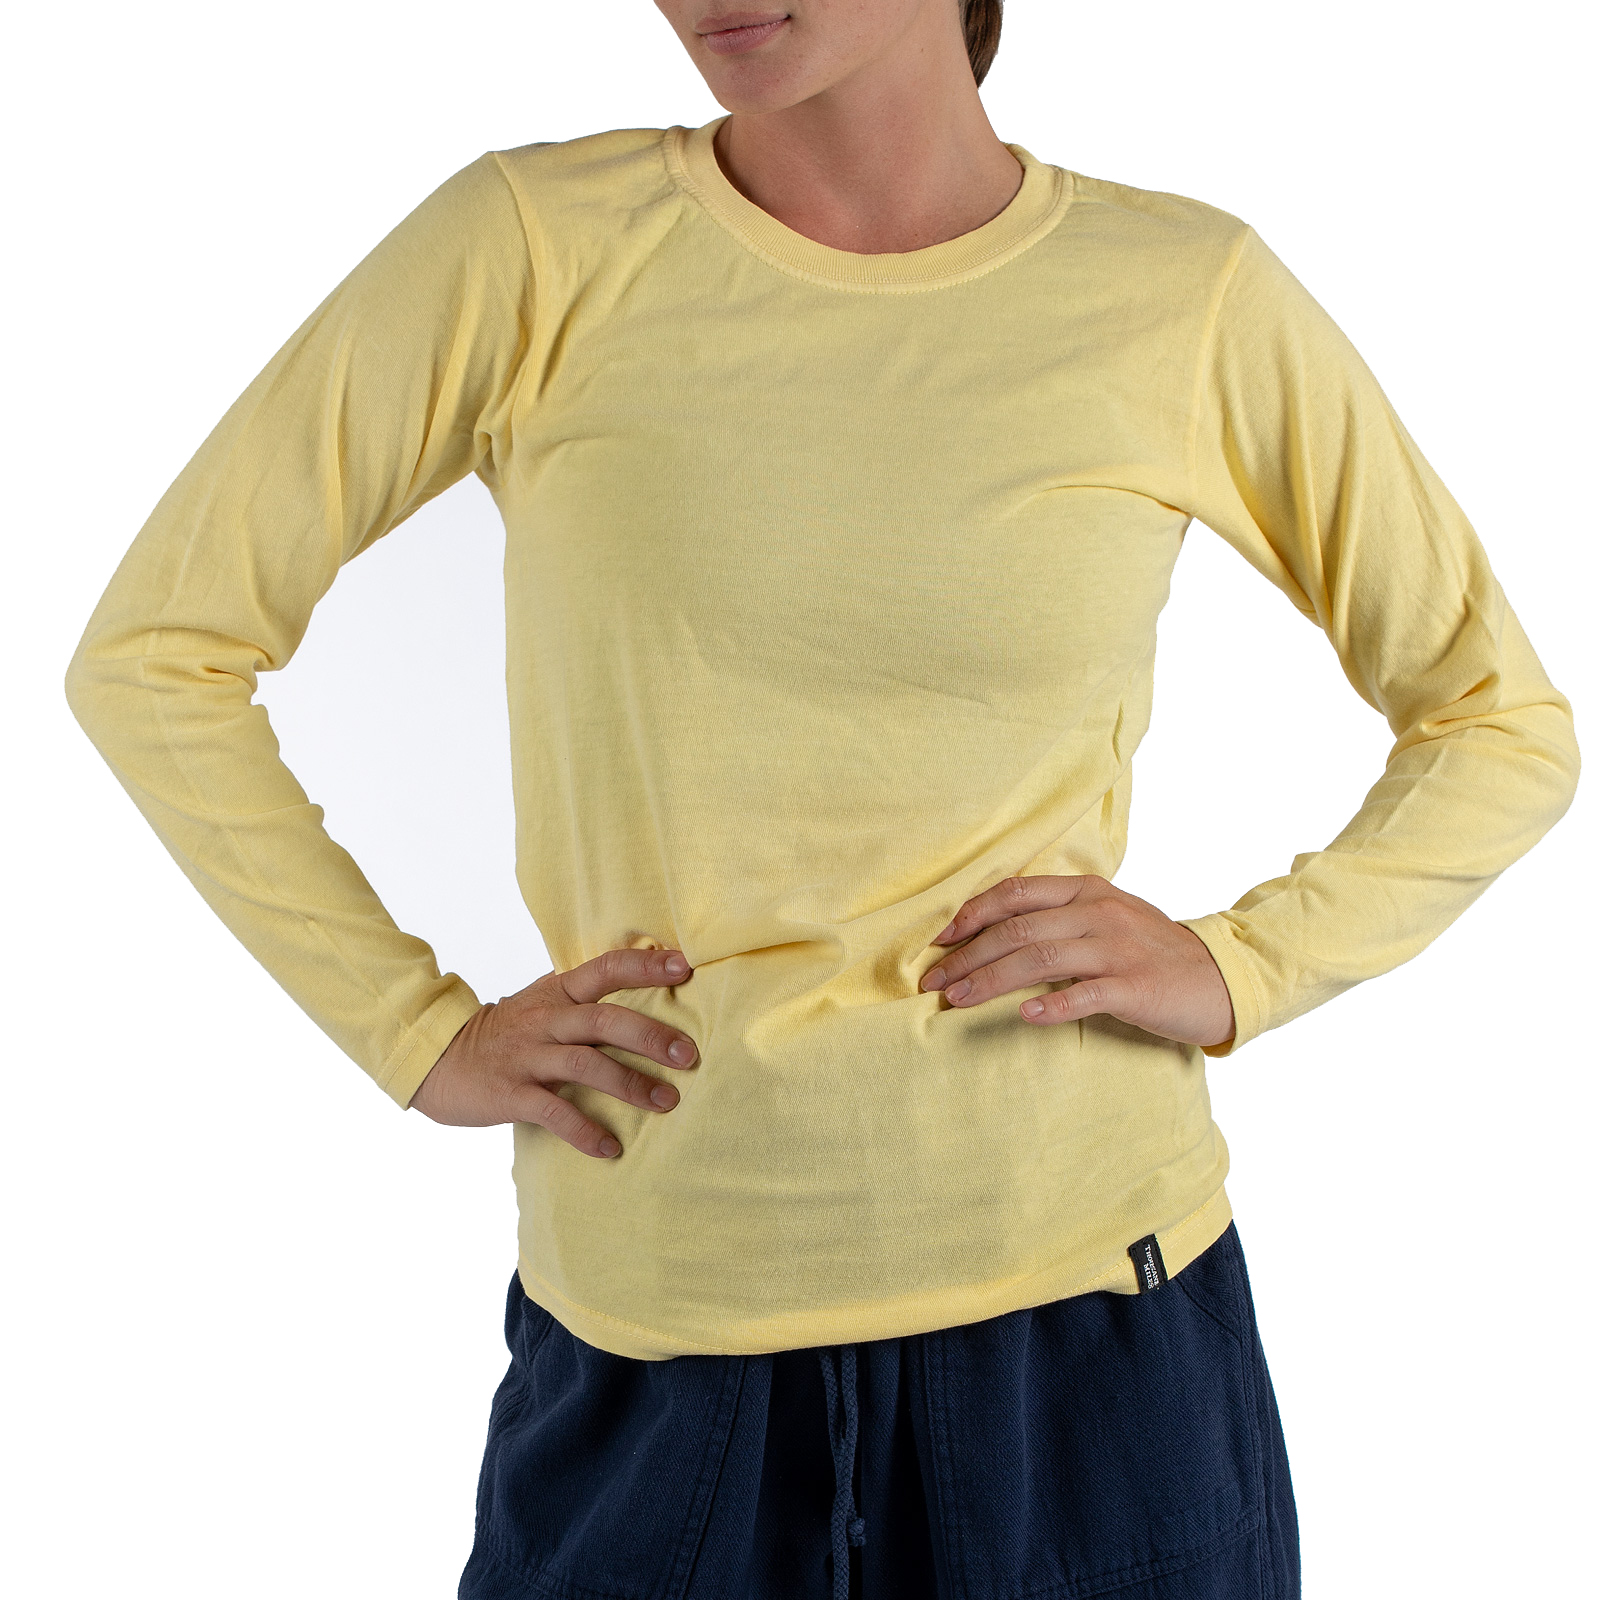 100% Cotton Long Sleeve Tier Top for Women - MADE IN USA